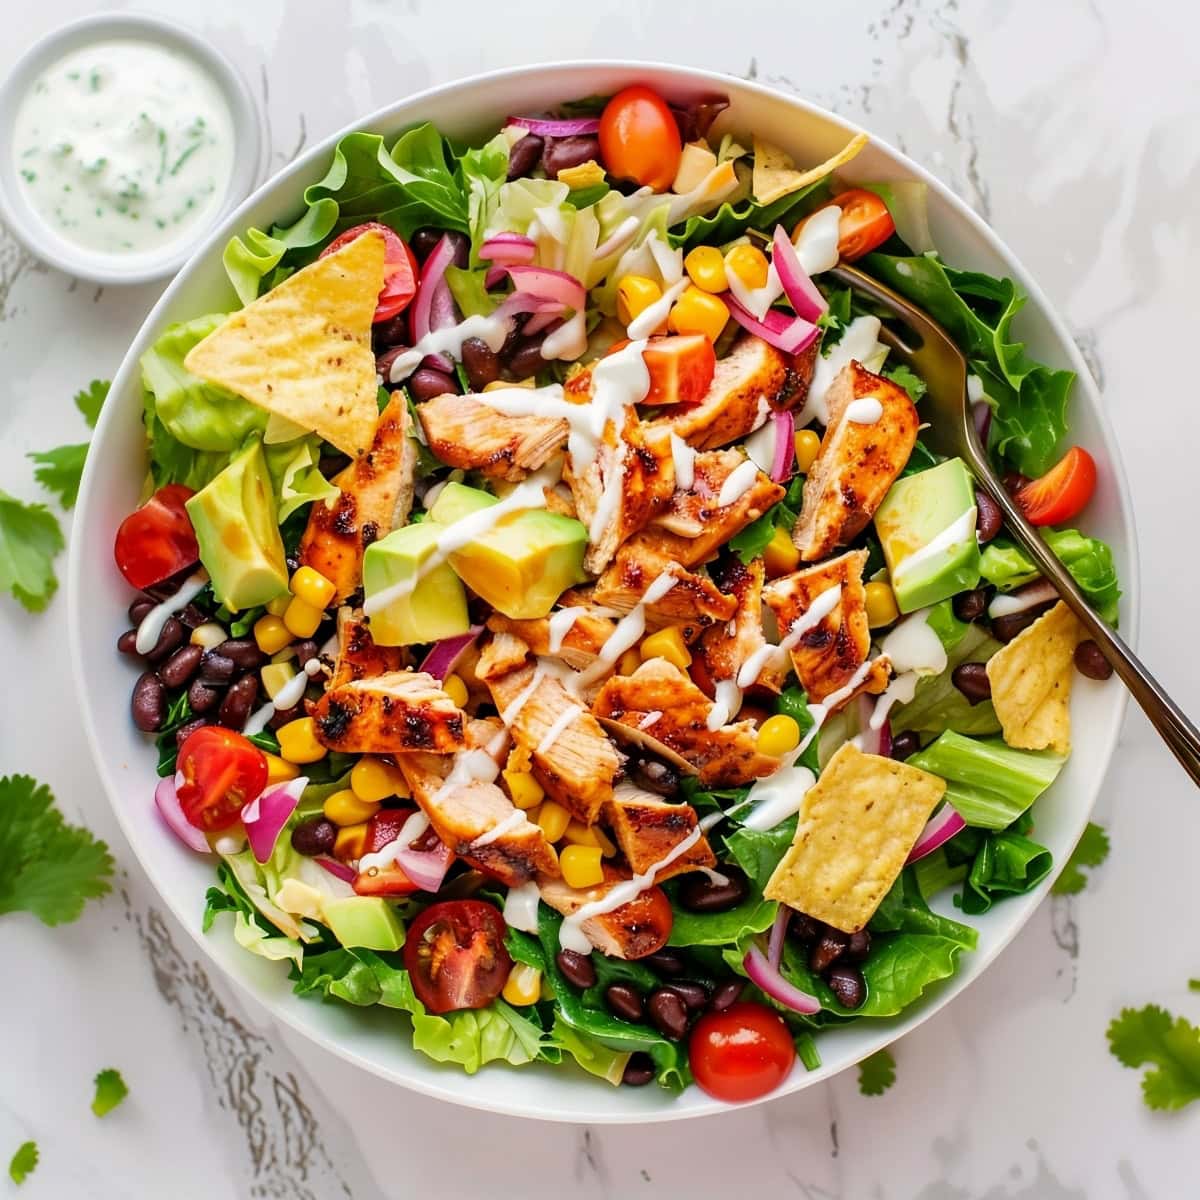 A delicious BBQ chicken salad in a white bowl, garnished with cherry tomatoes, red onions, and avocado chunks.